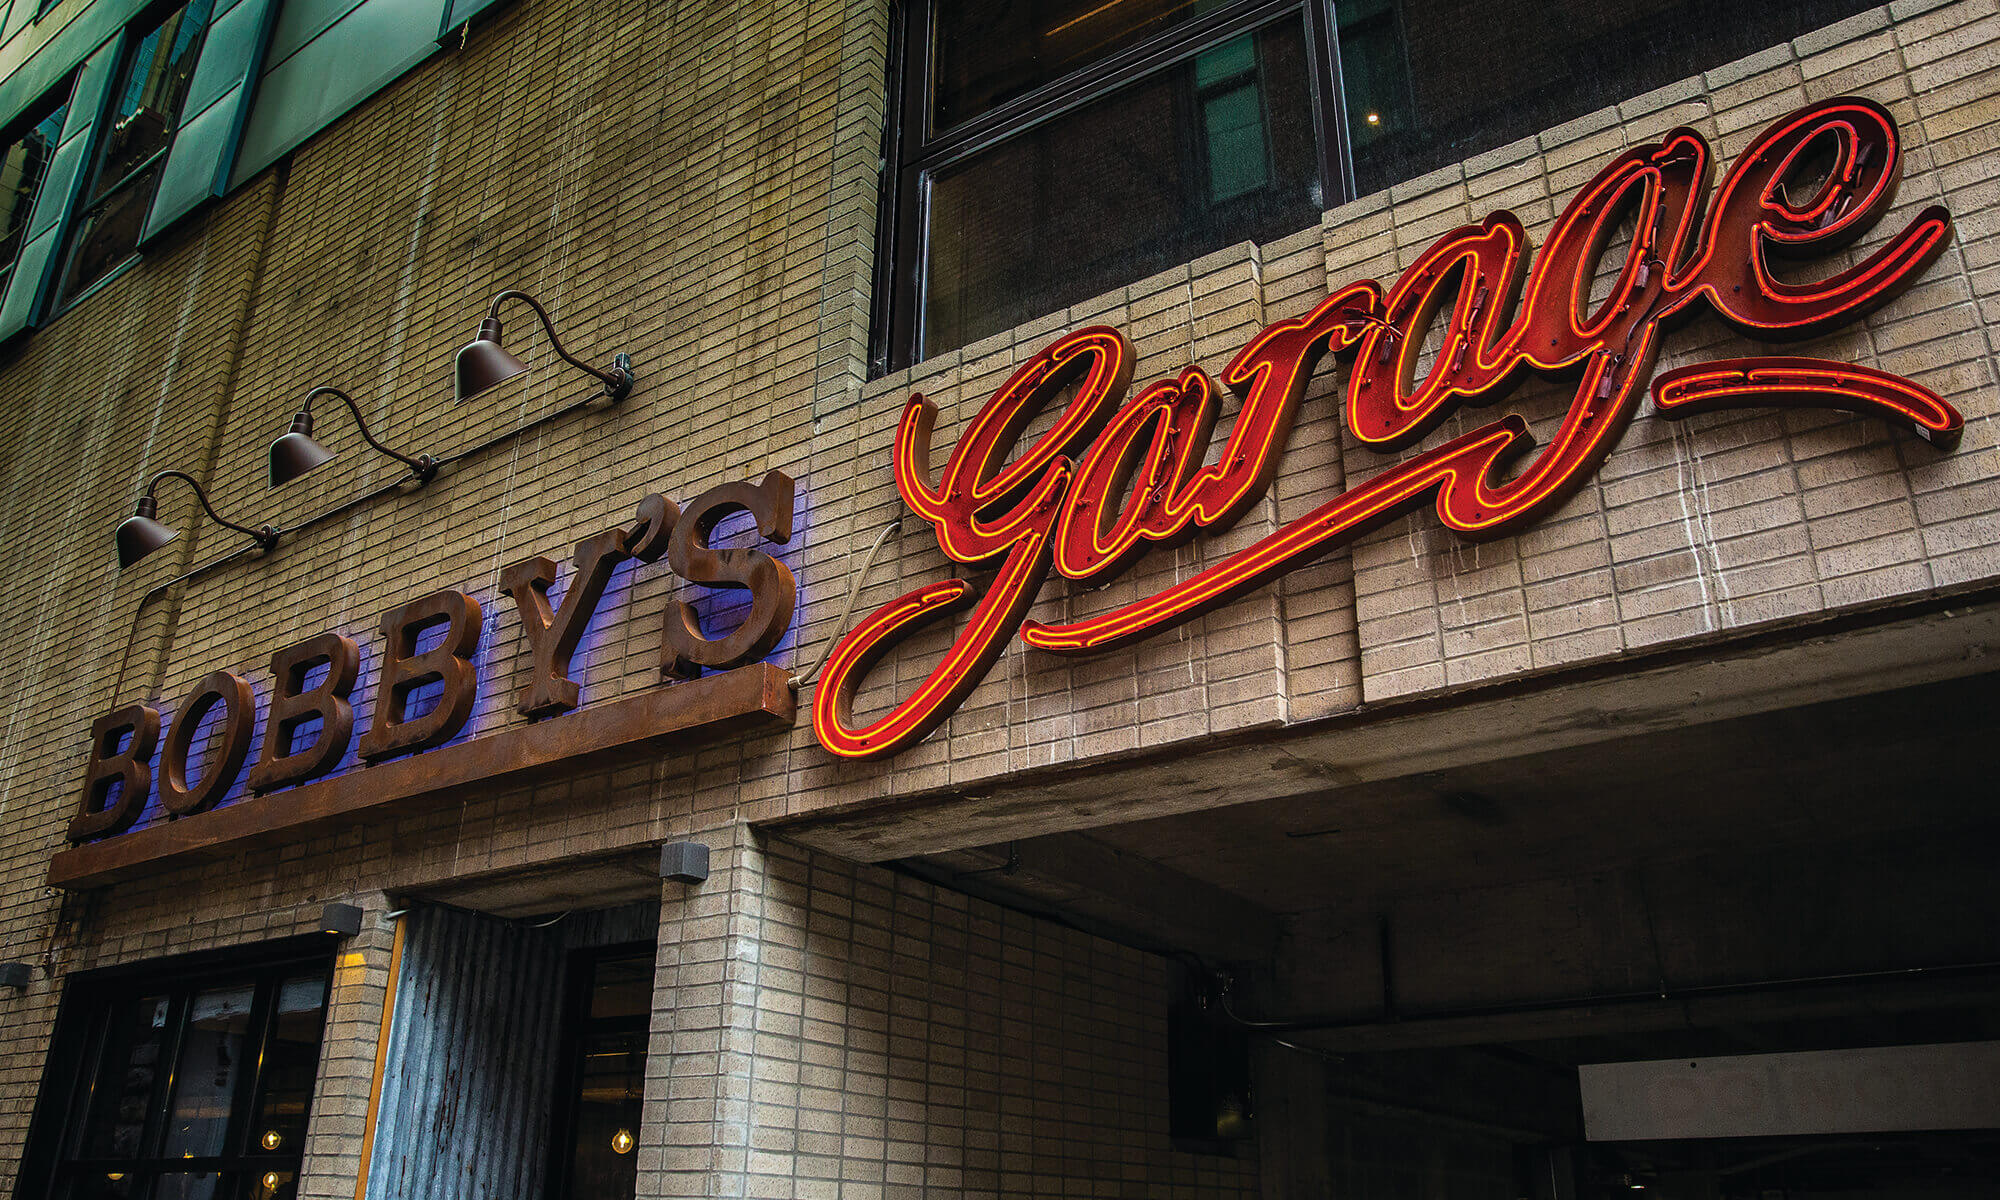 neon and metal Bobby's Garage logotype sign on a brick wall above a door and garage entrance